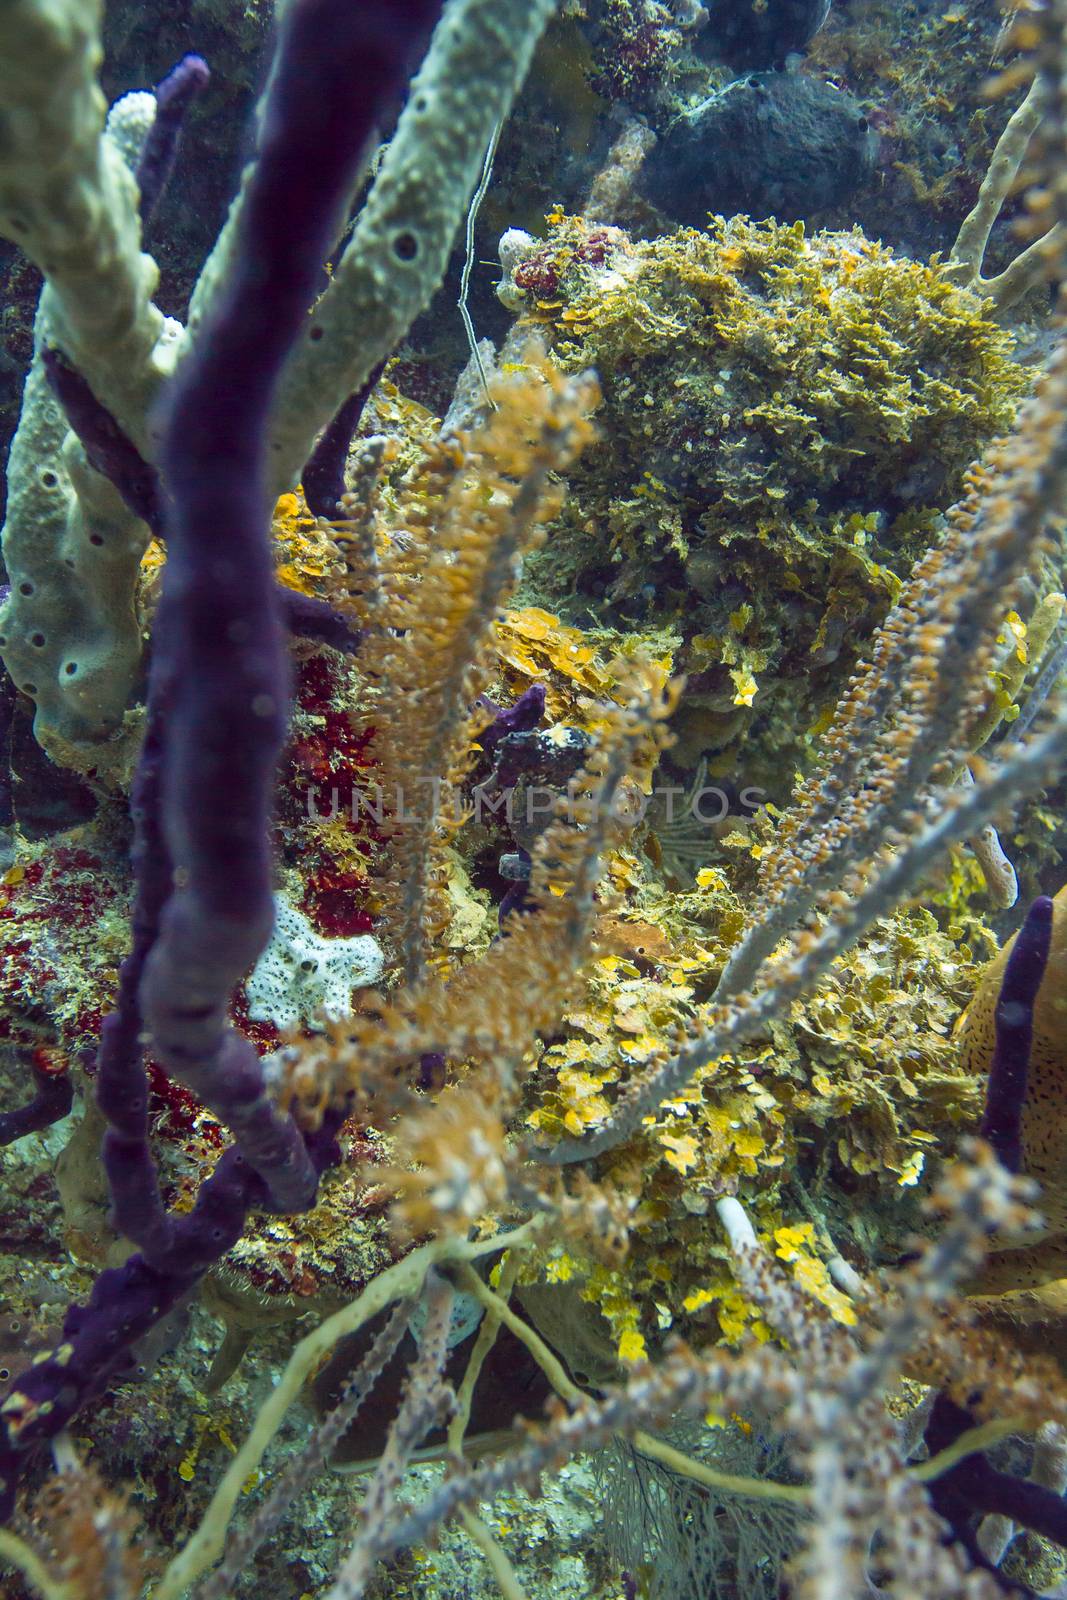 Seahorse cammouflage in between branches of coral reef